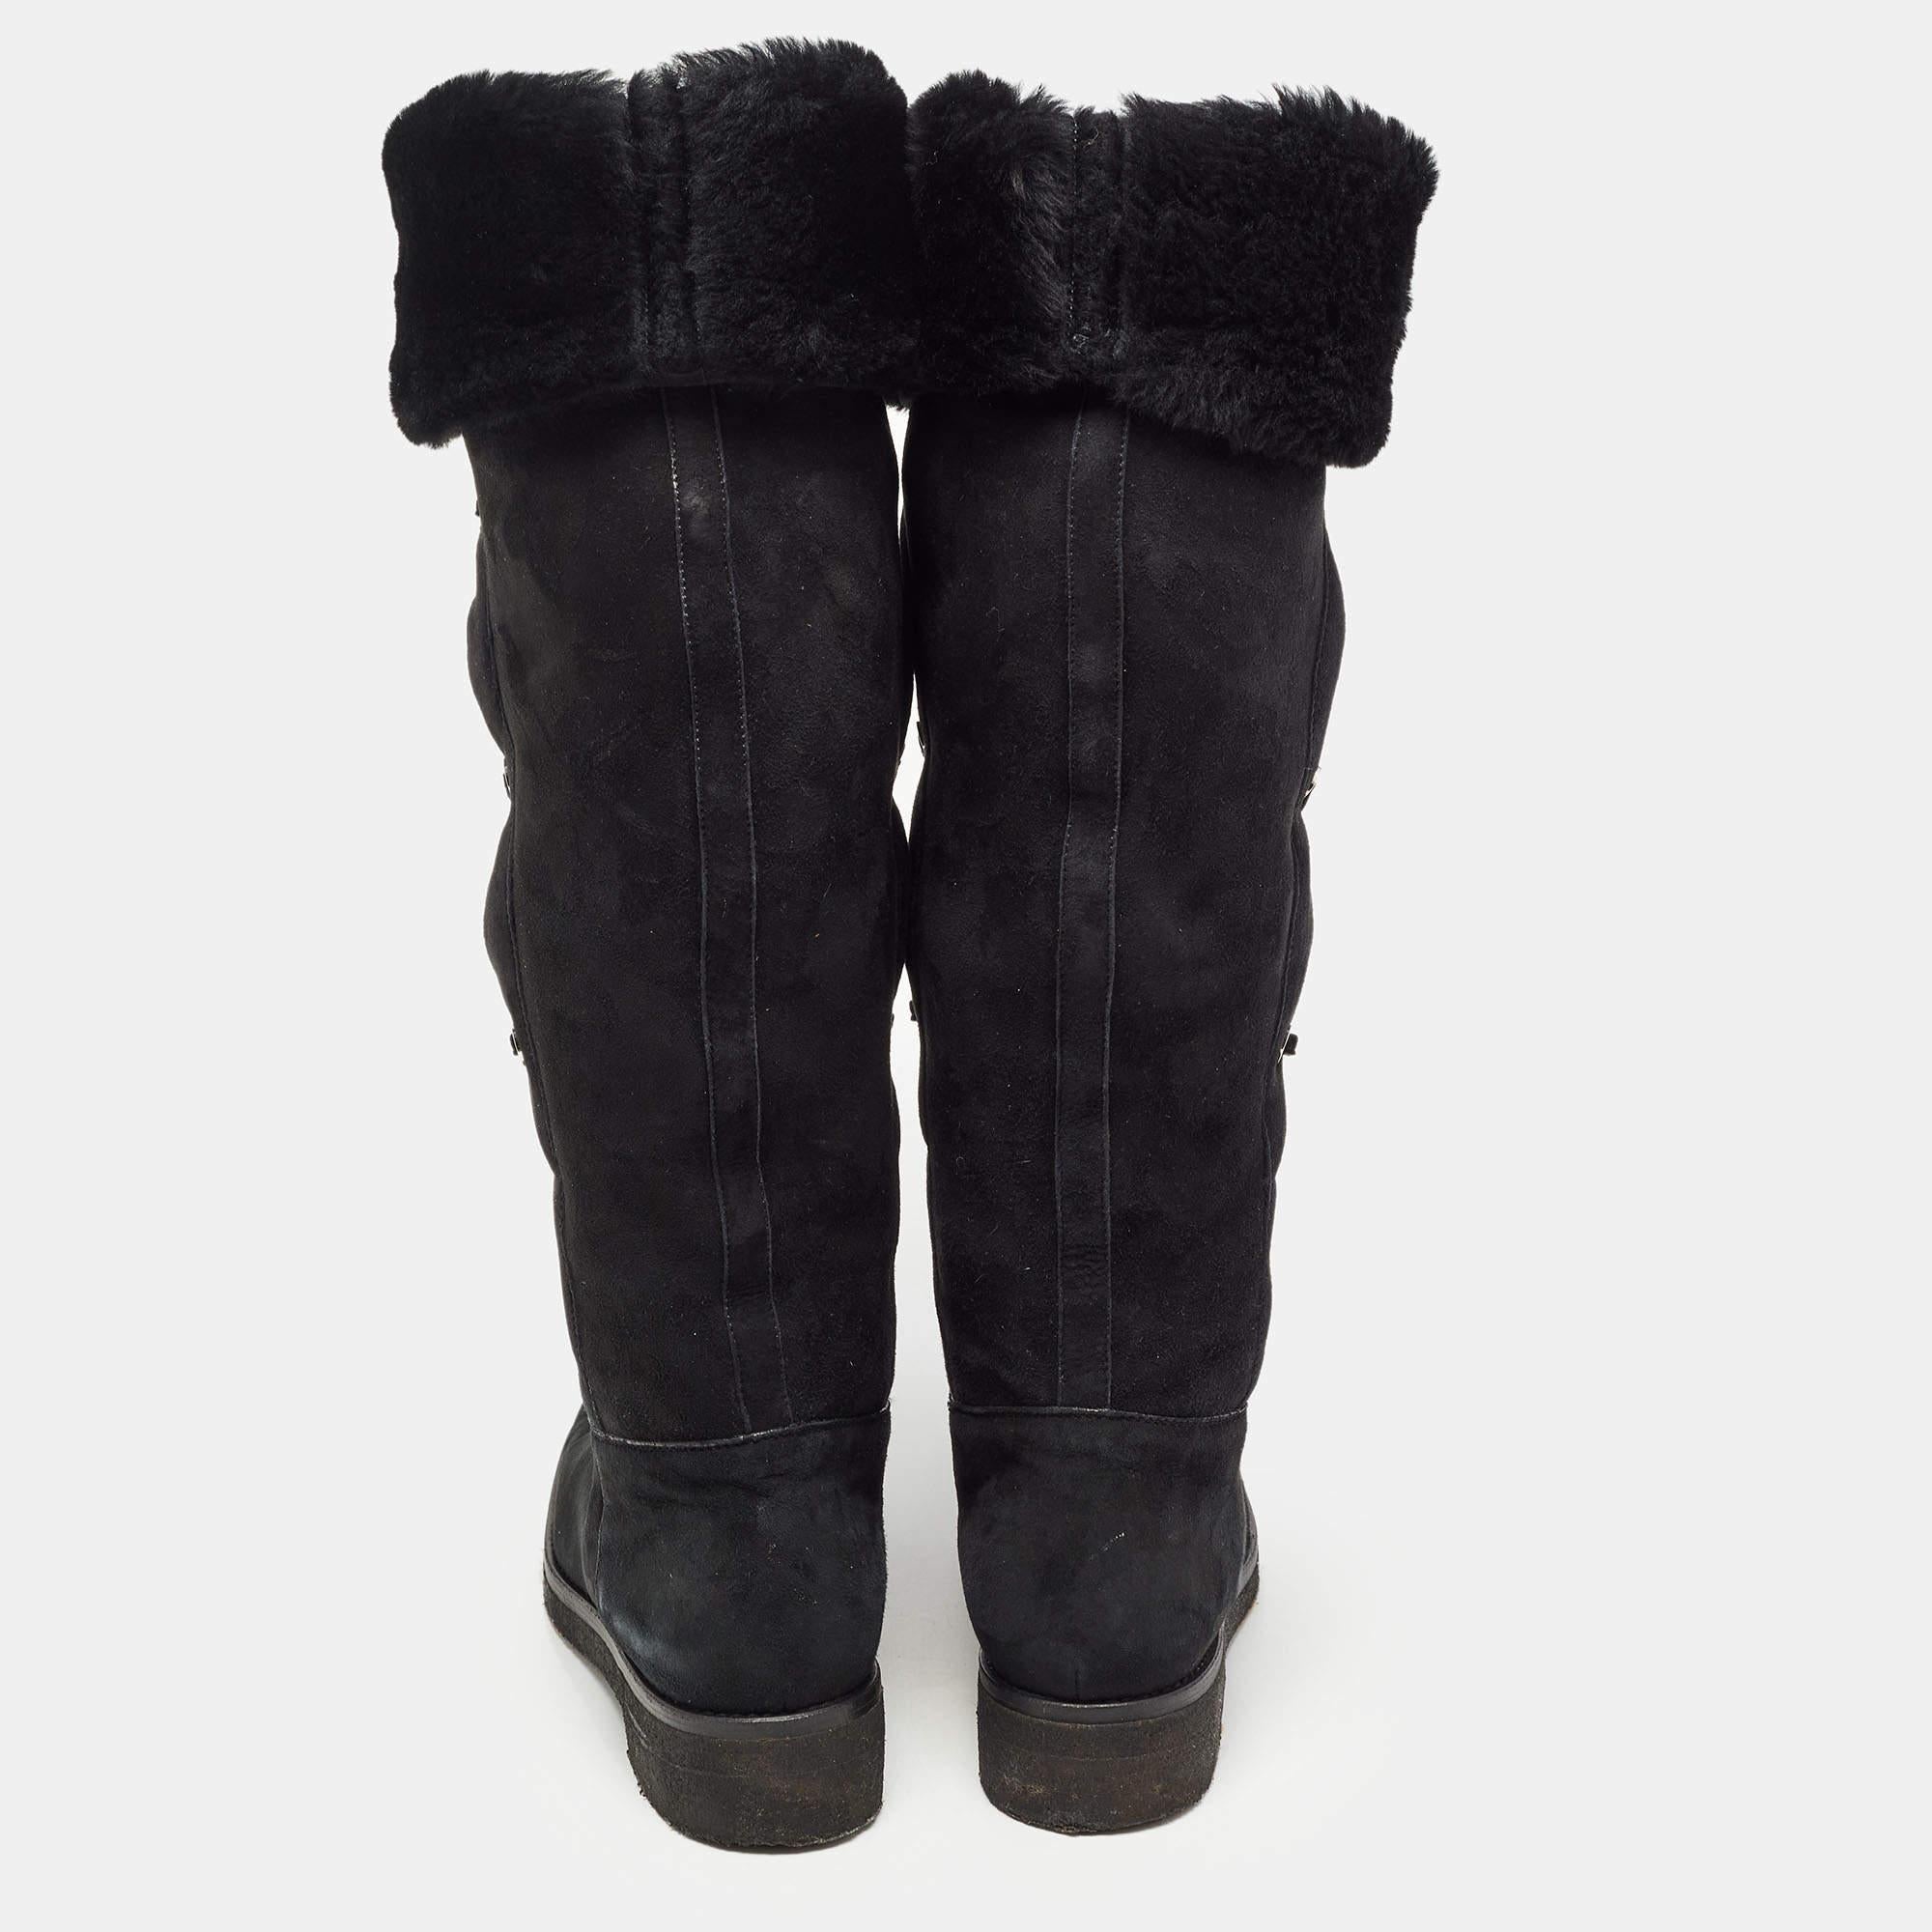 Loro Piana Black Suede and Fur Knee Length Flat Boots Size 40 In Good Condition For Sale In Dubai, Al Qouz 2